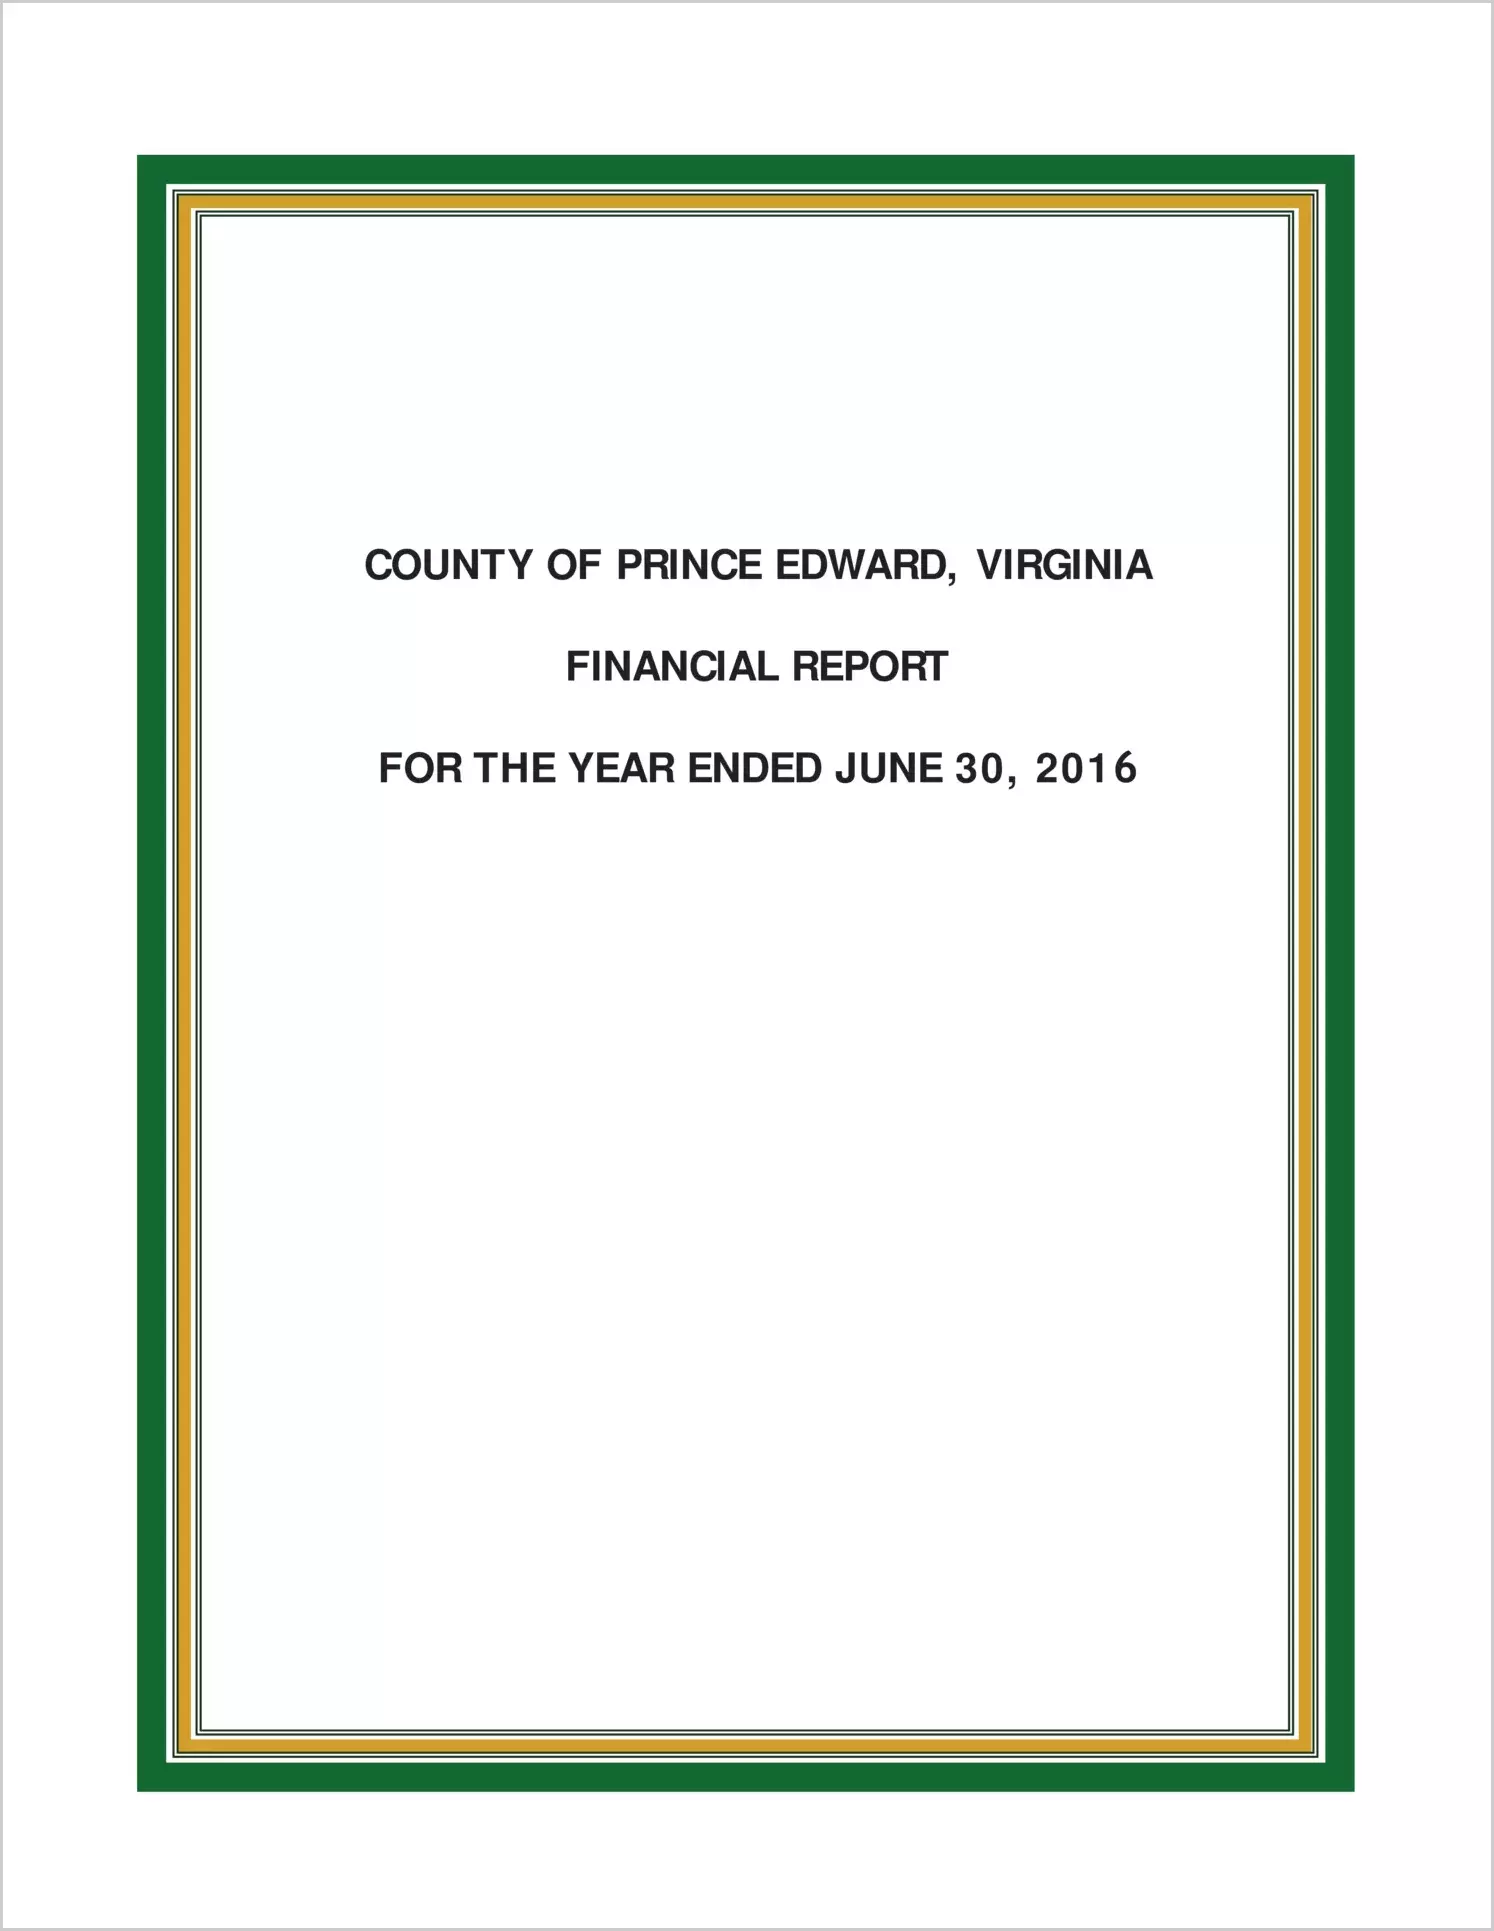 2016 Annual Financial Report for County of Prince Edward